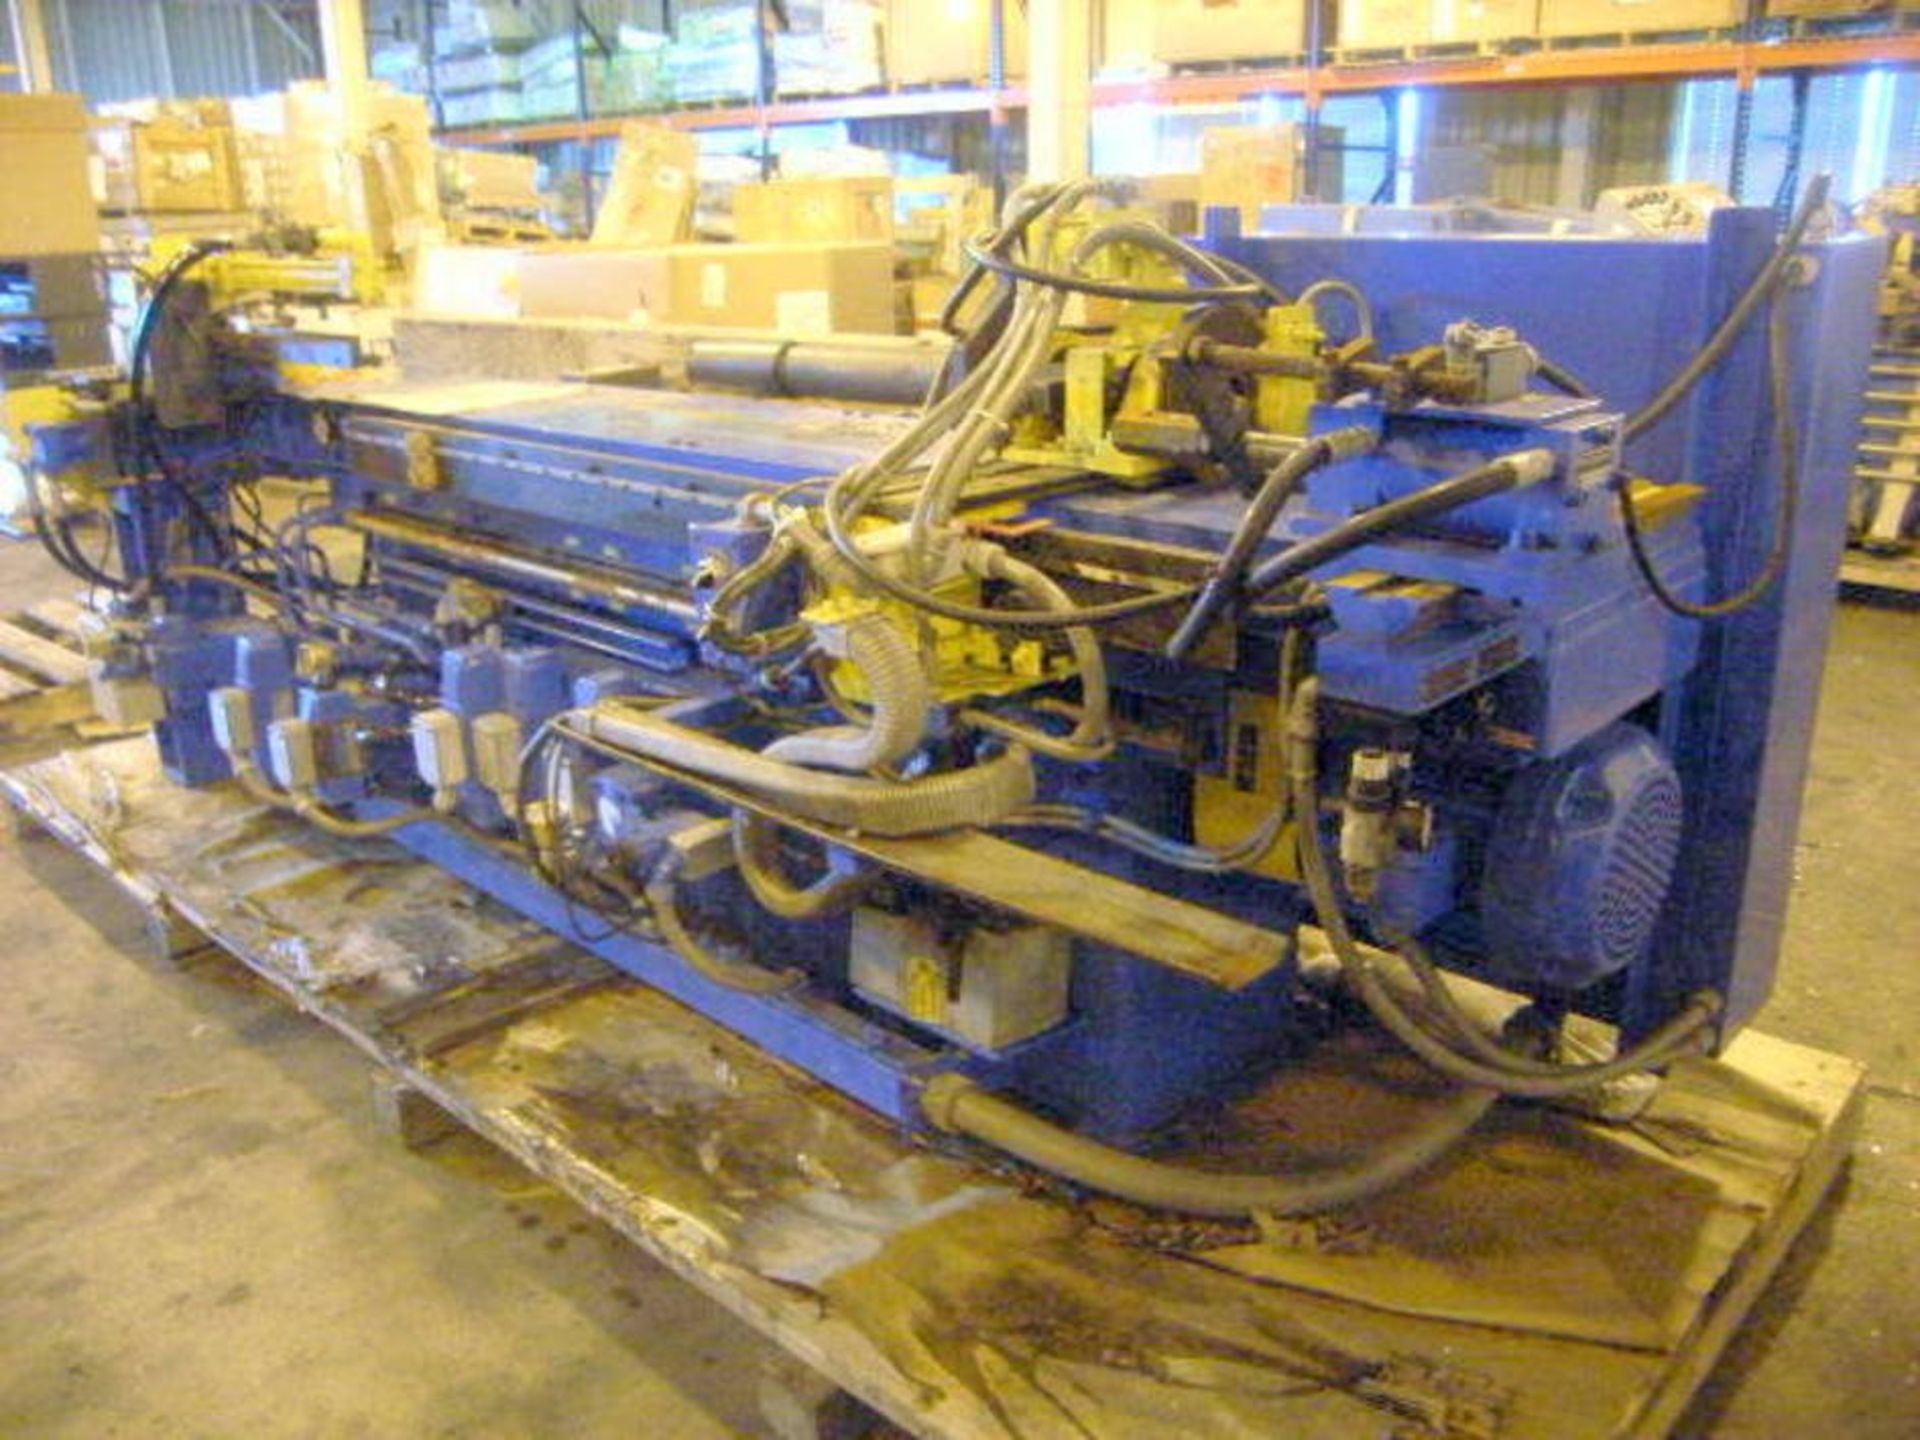 Pines Horizontal Hydraulic Tube Bender, 1 1/2" x 0.188", Mdl: #1 - Painesville, OH - 7116P - Image 3 of 35